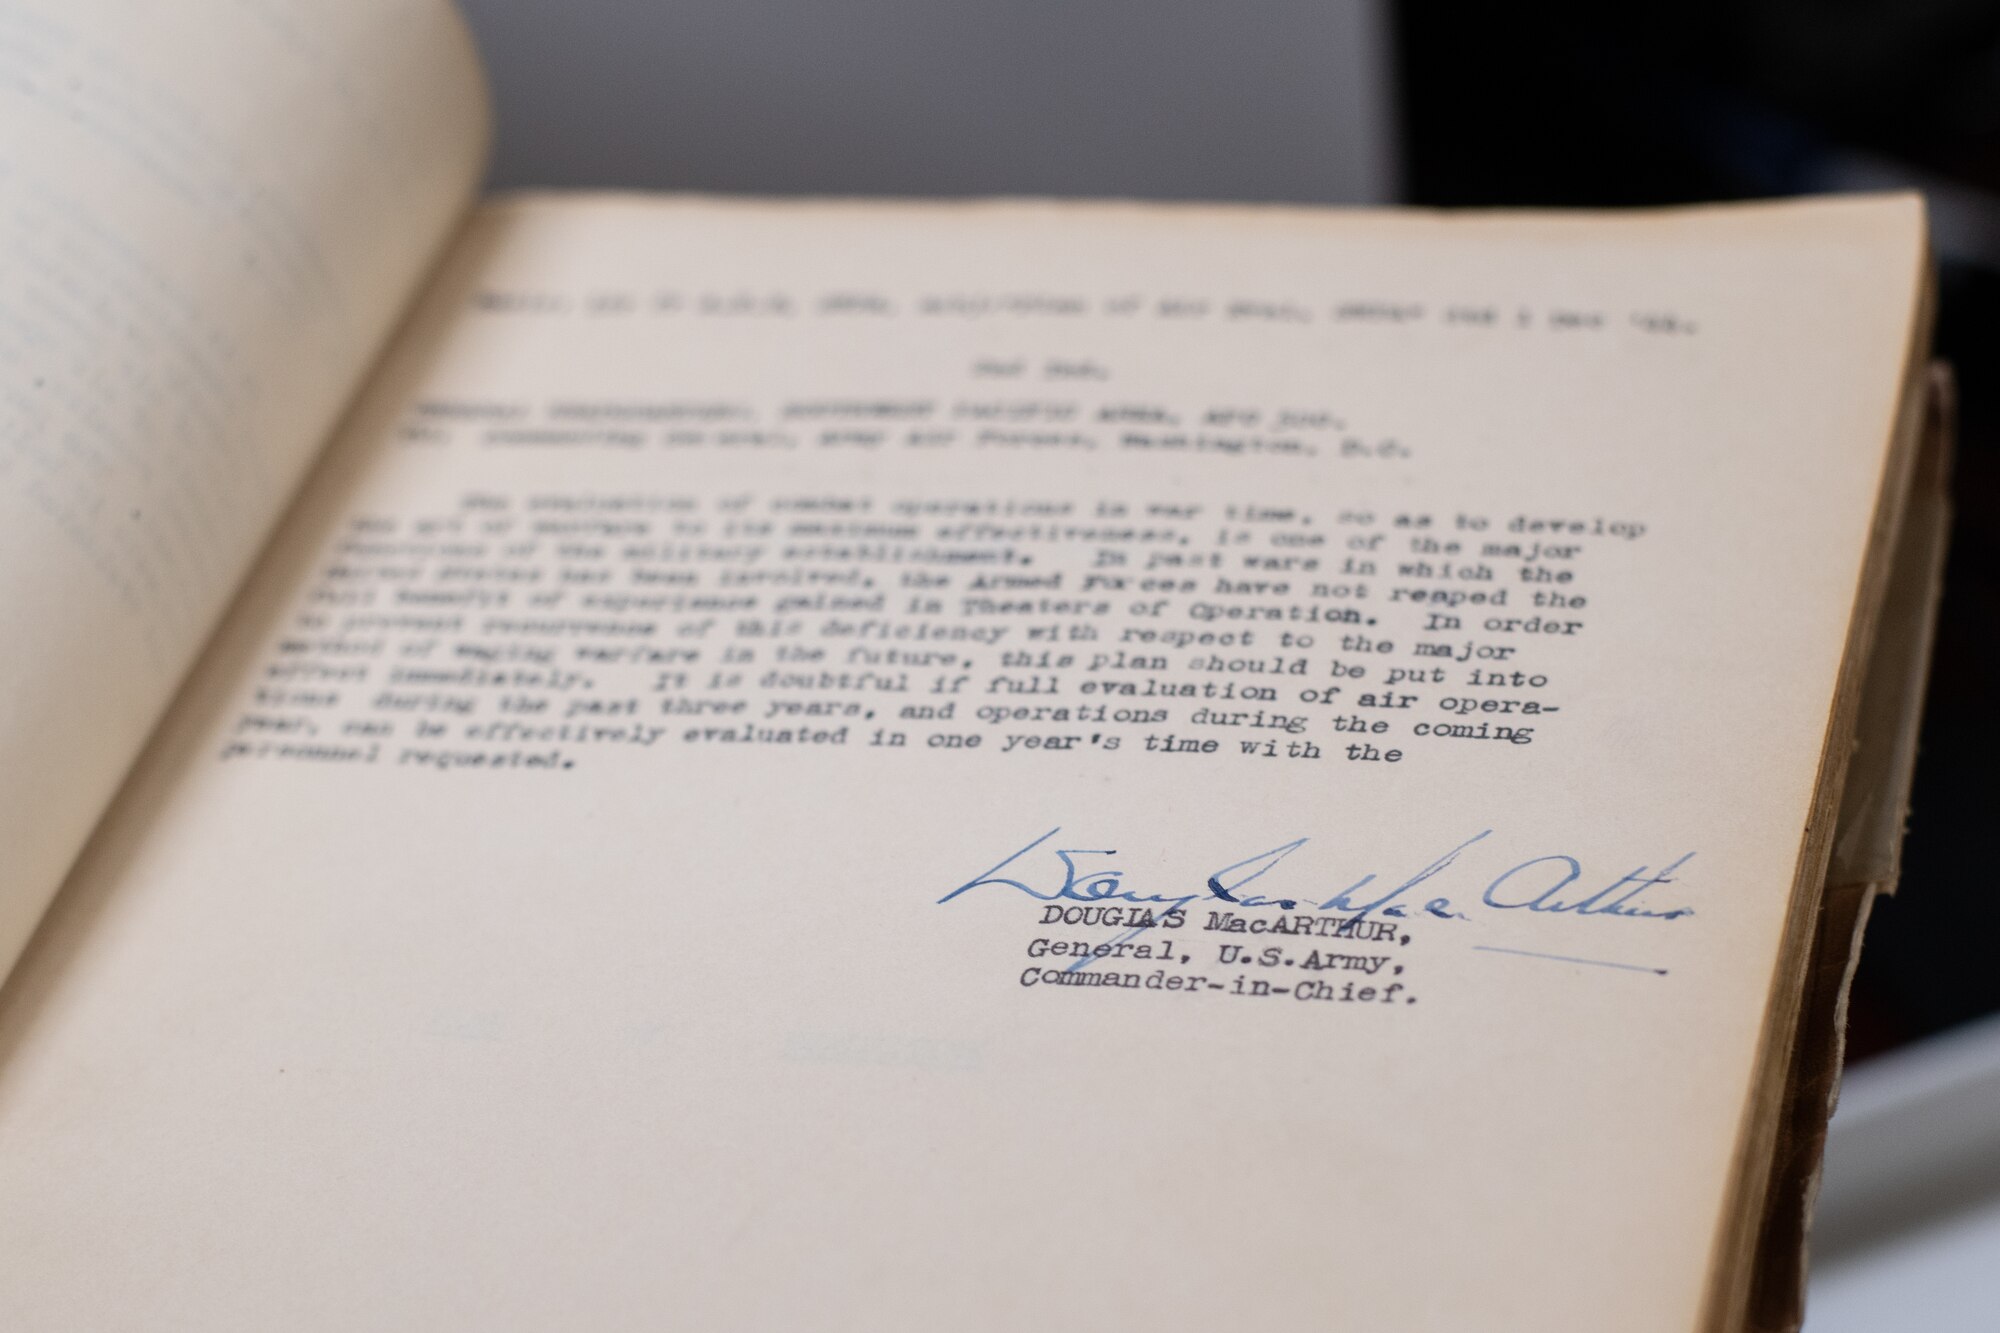 An Air University Library employee holds a historical document signed by former Commander-in-Chief, U.S. Army Gen. Douglas MacArthur, Aug. 22, 2019, on Maxwell Air Force Base, Alabama. This document is just one of many historical products the Air University Library is digitizing, making it available to DOD employees, regardless of location.